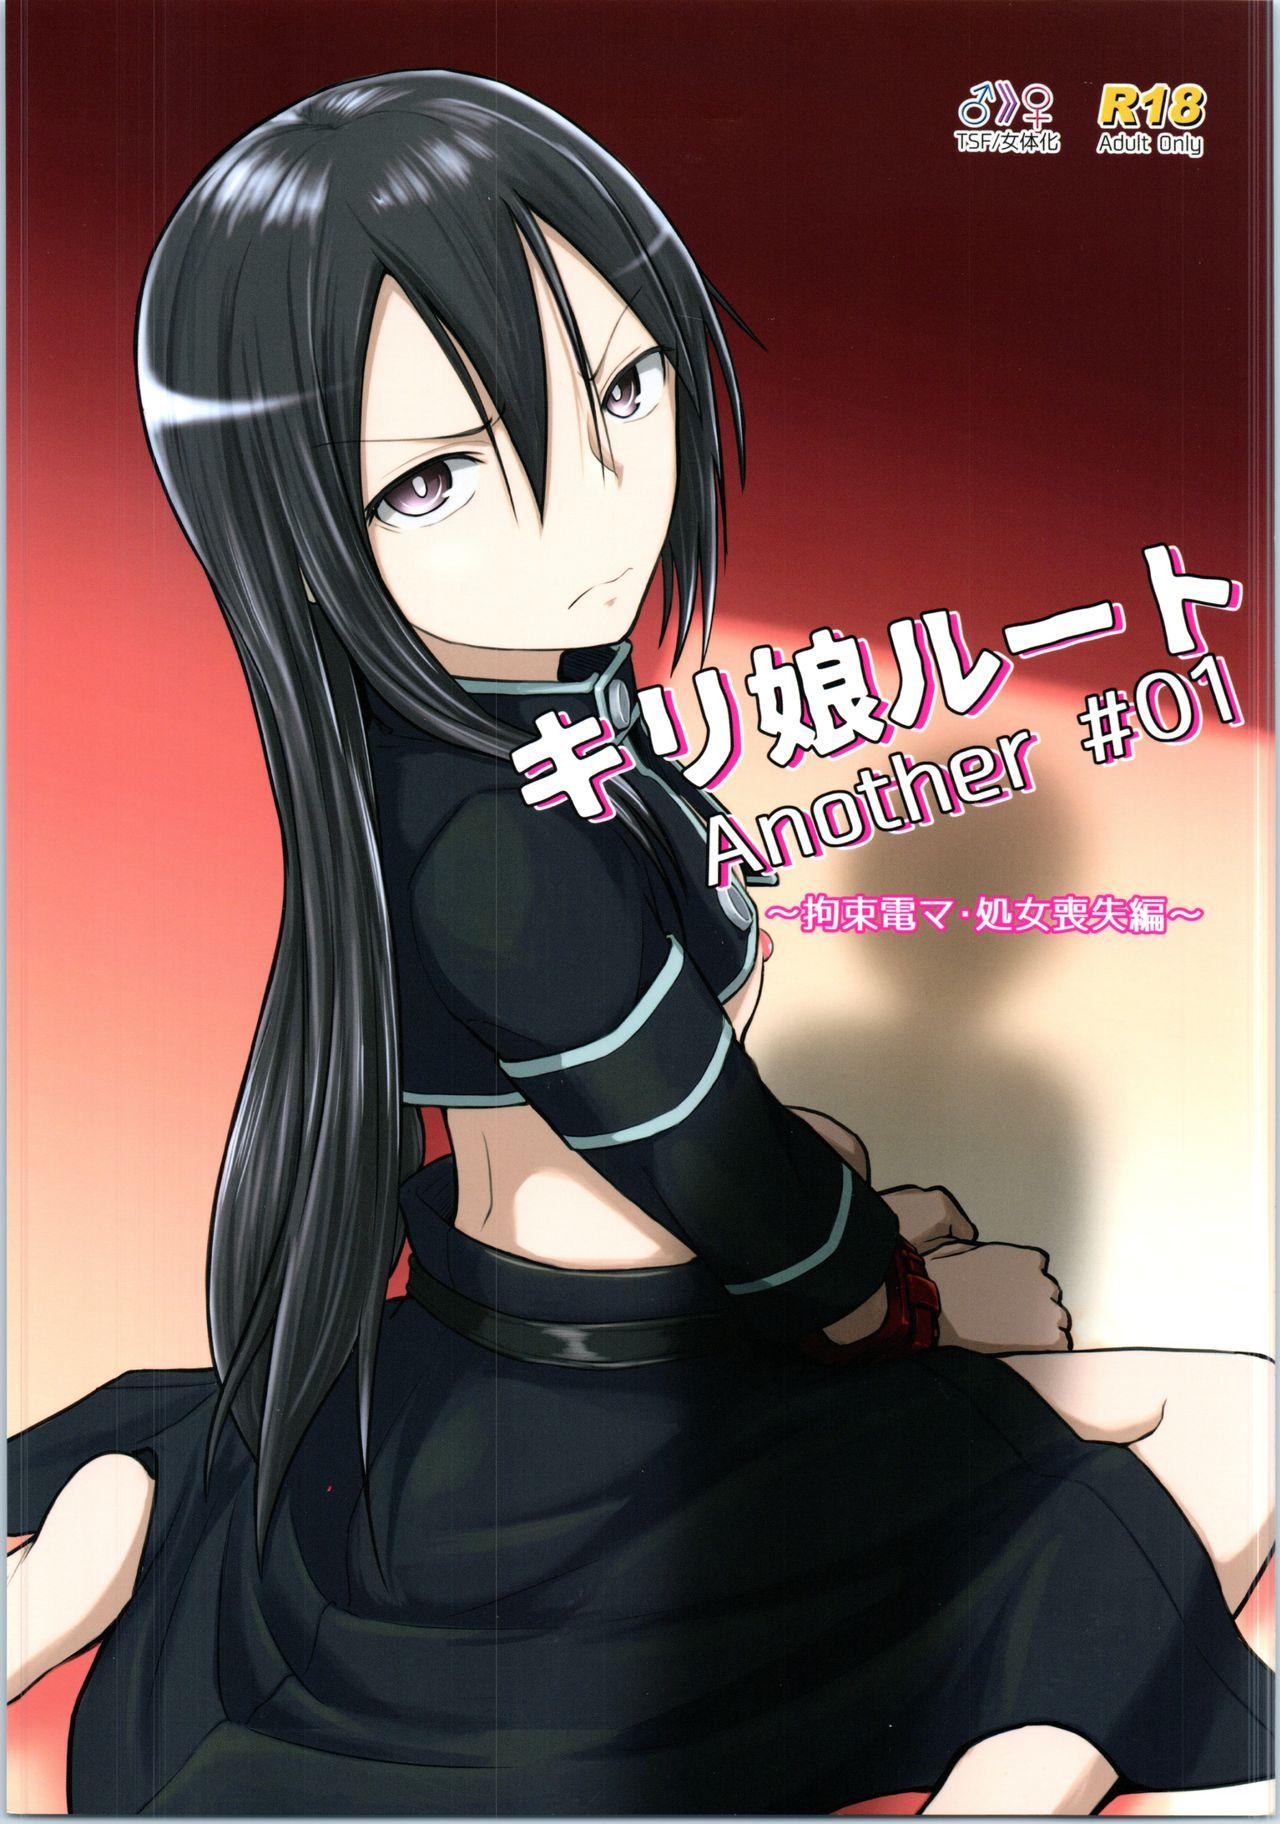 Hard Core Porn Another 01 - Sword art online Tied - Picture 1